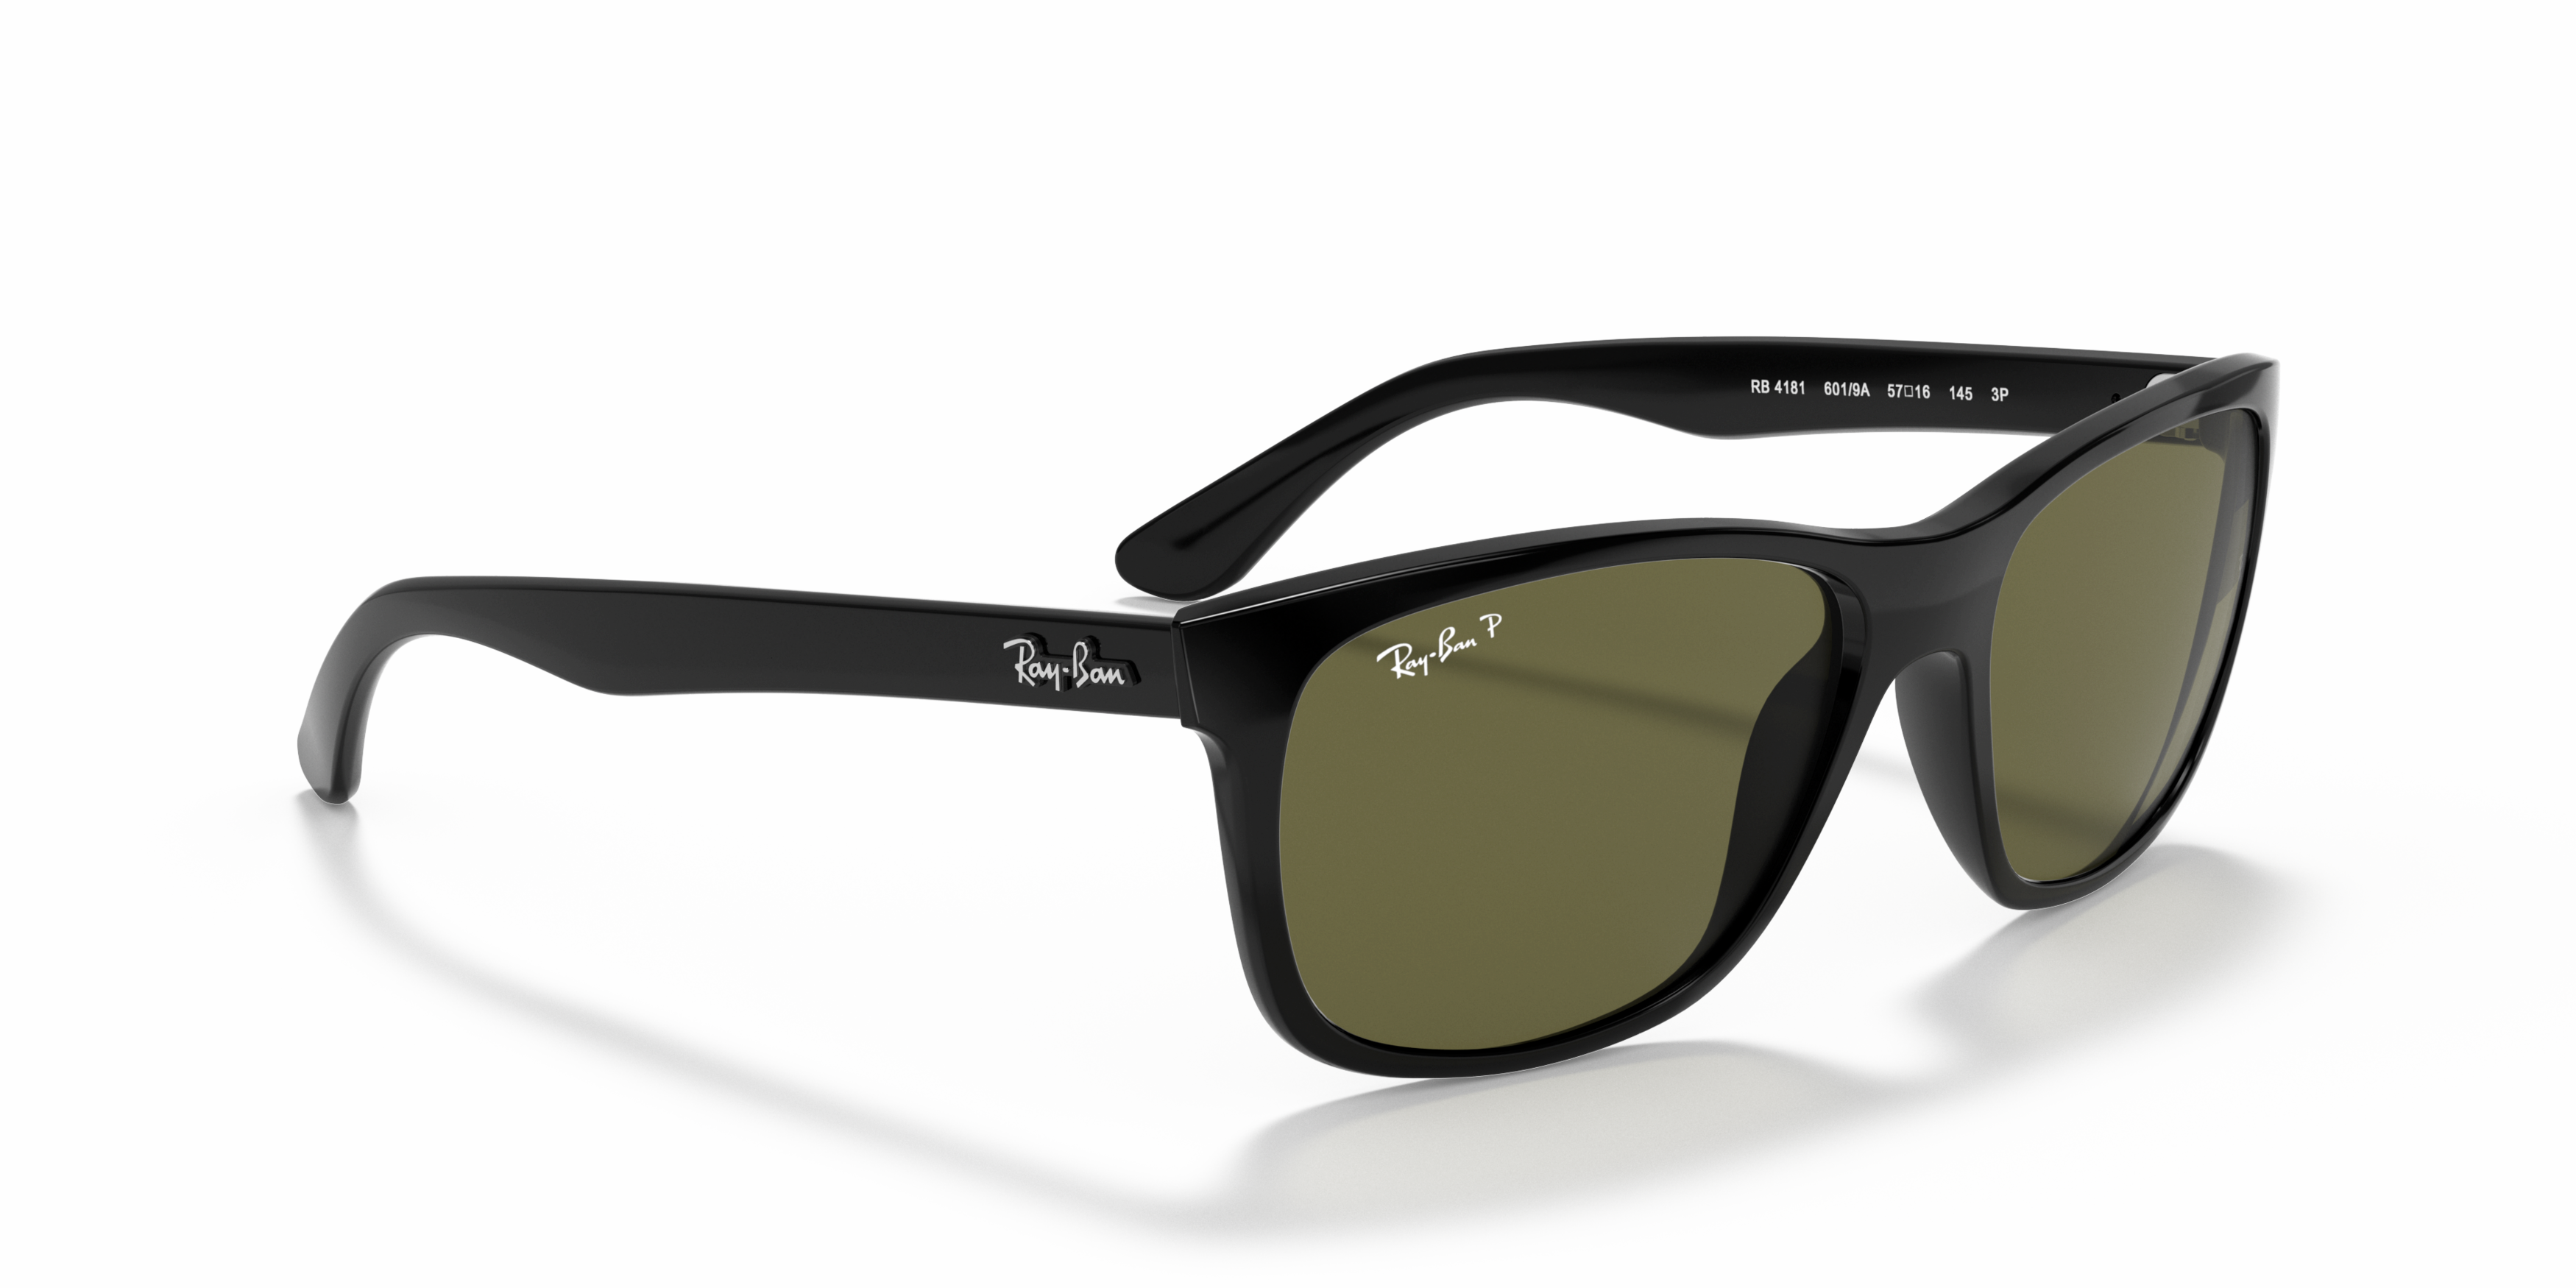 Angle_Right01 Ray-Ban 0RB4181 601/9A Verde / Negro